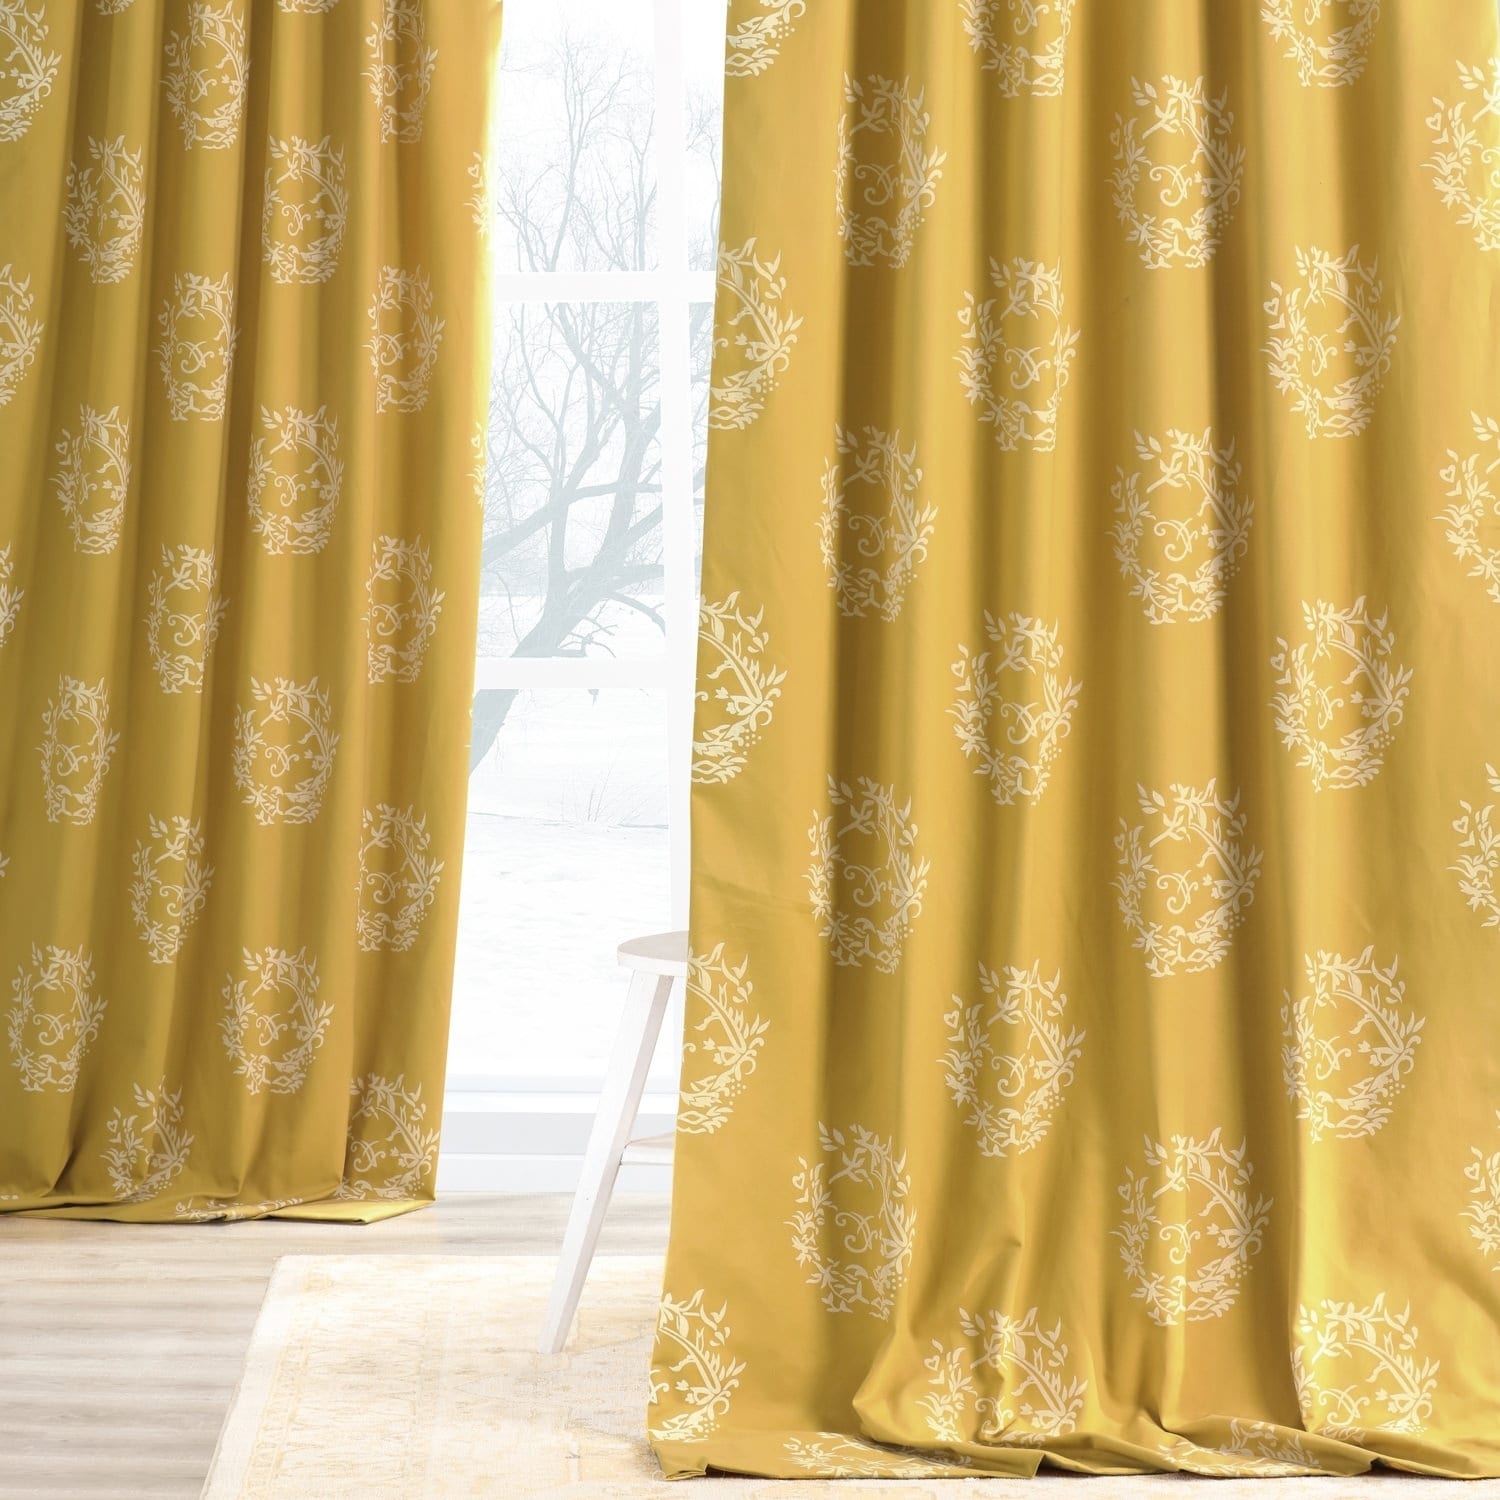 Isles Mustard Printed Cotton Curtain Panel Today $75.79   $88.99